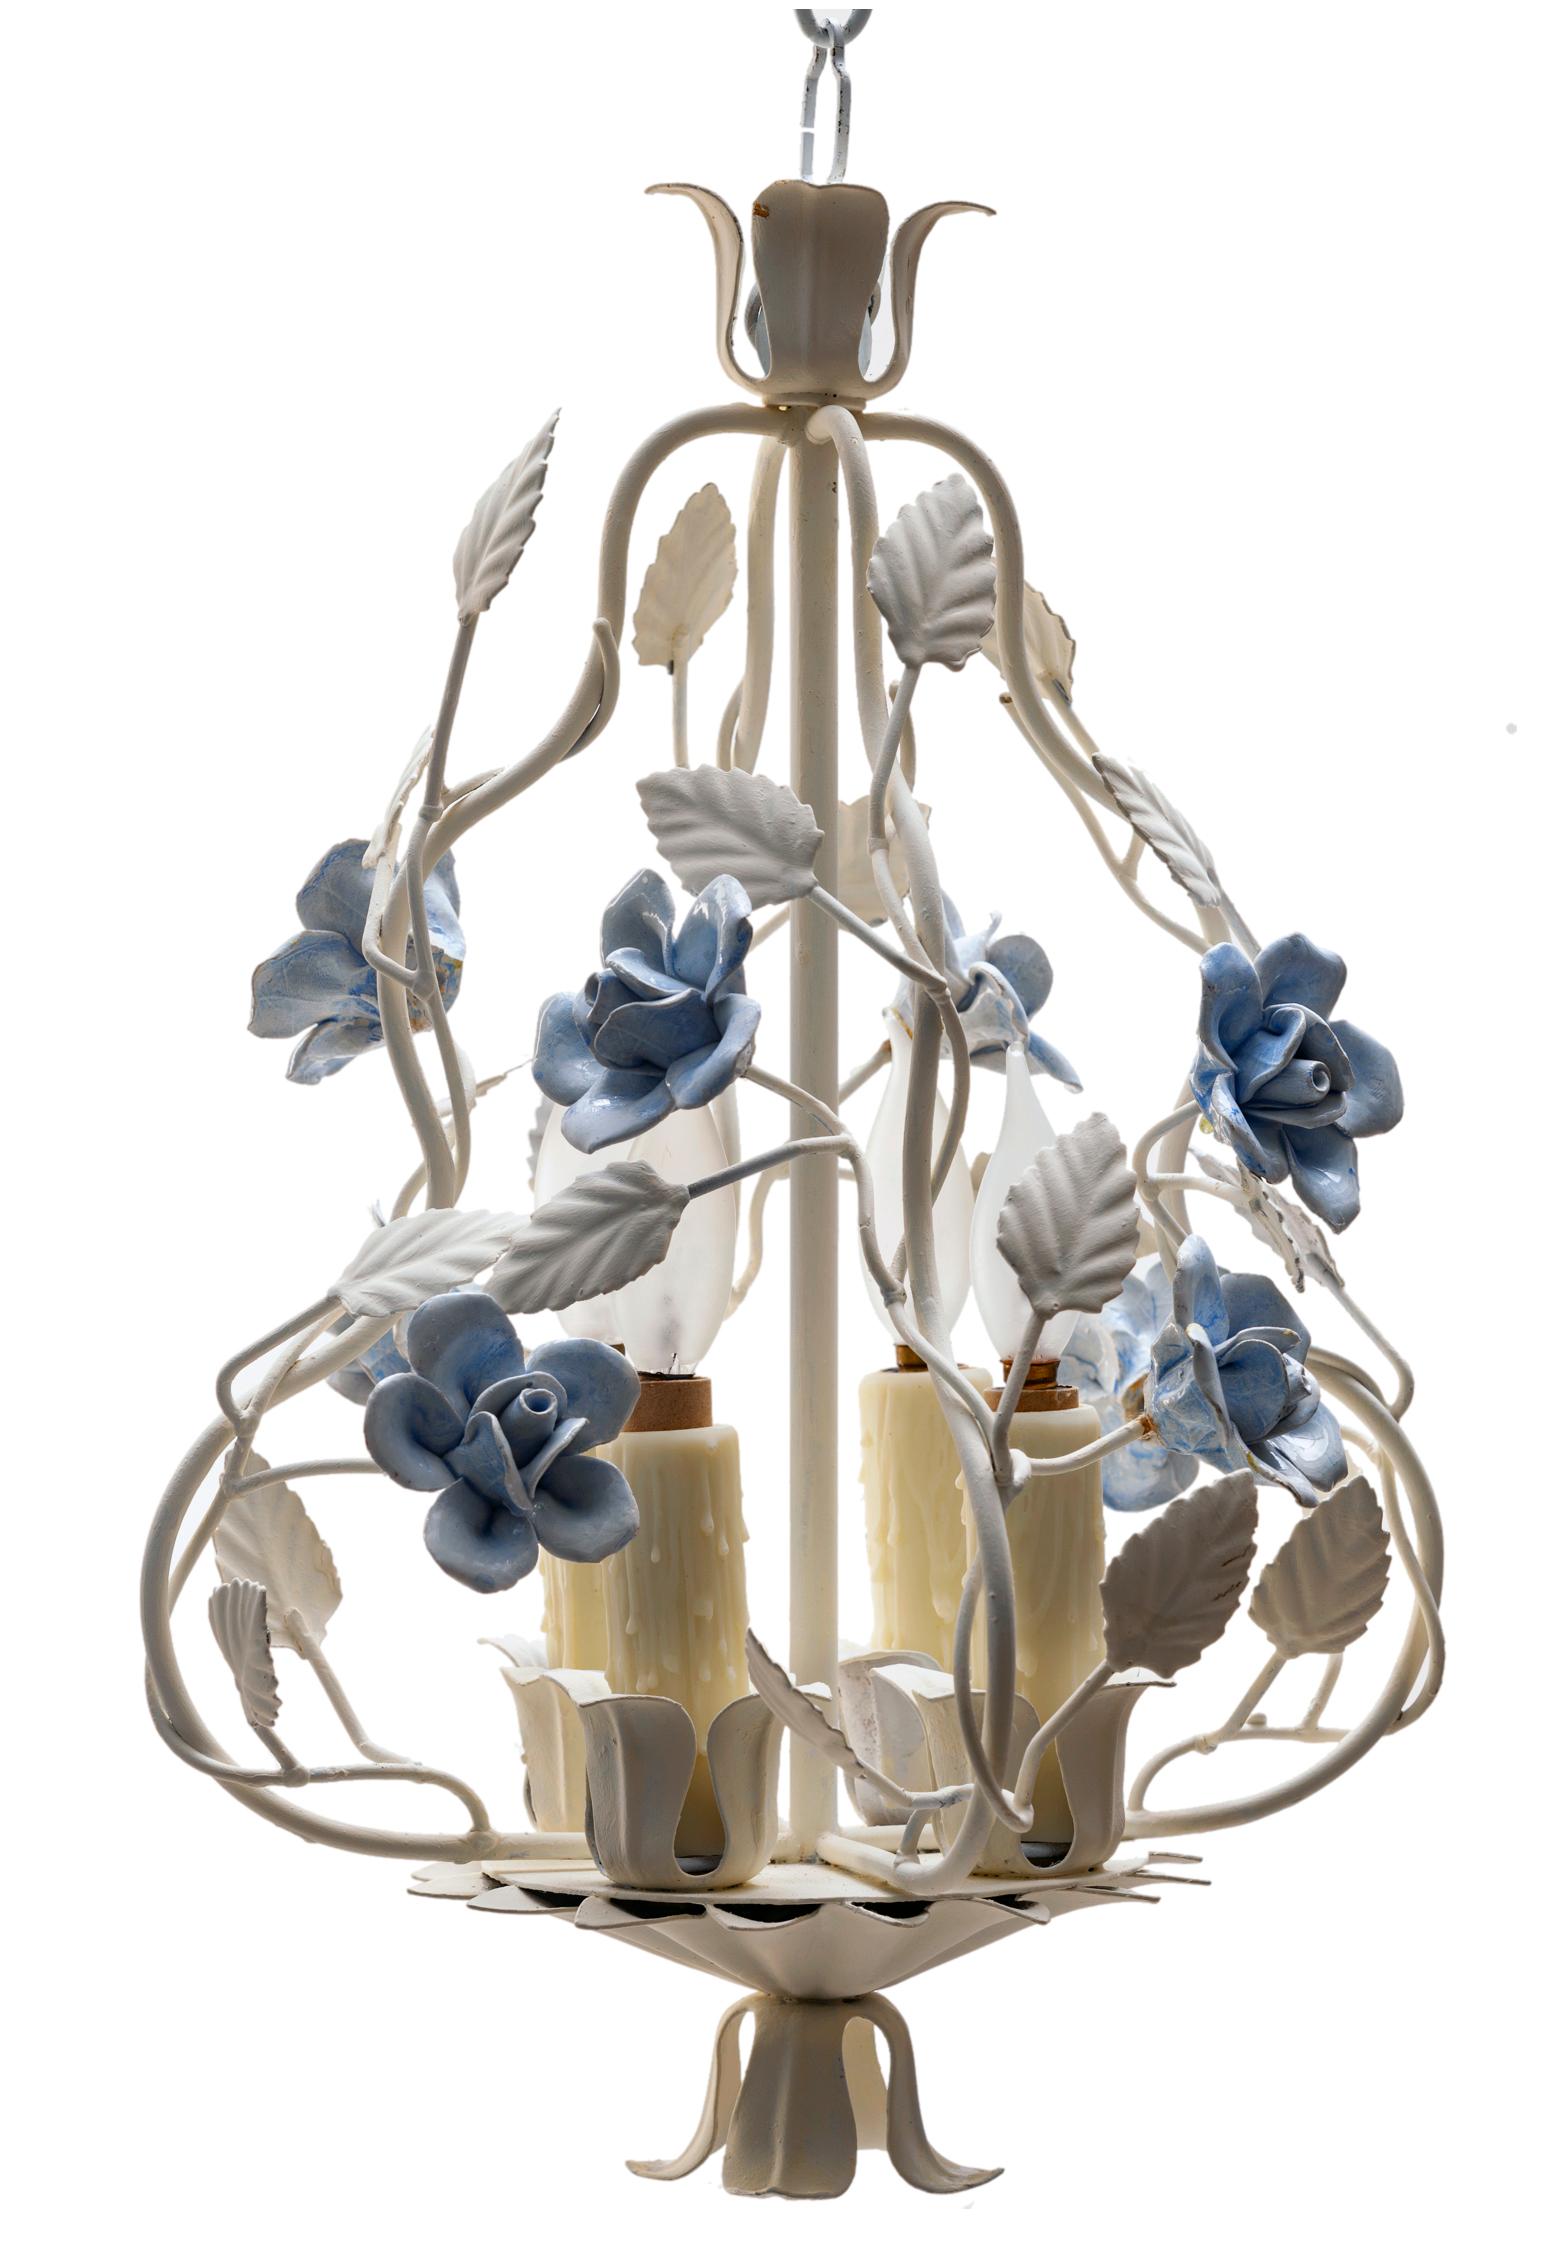 A tole chandelier with cornflower blue ceramic flowers, finger impressions on each hand made petal. CA srurreal cornflower blue rosehips are studded throughout.
Hand-painted metal tole frame with branches & leaves.
Rewired with an in line switch &